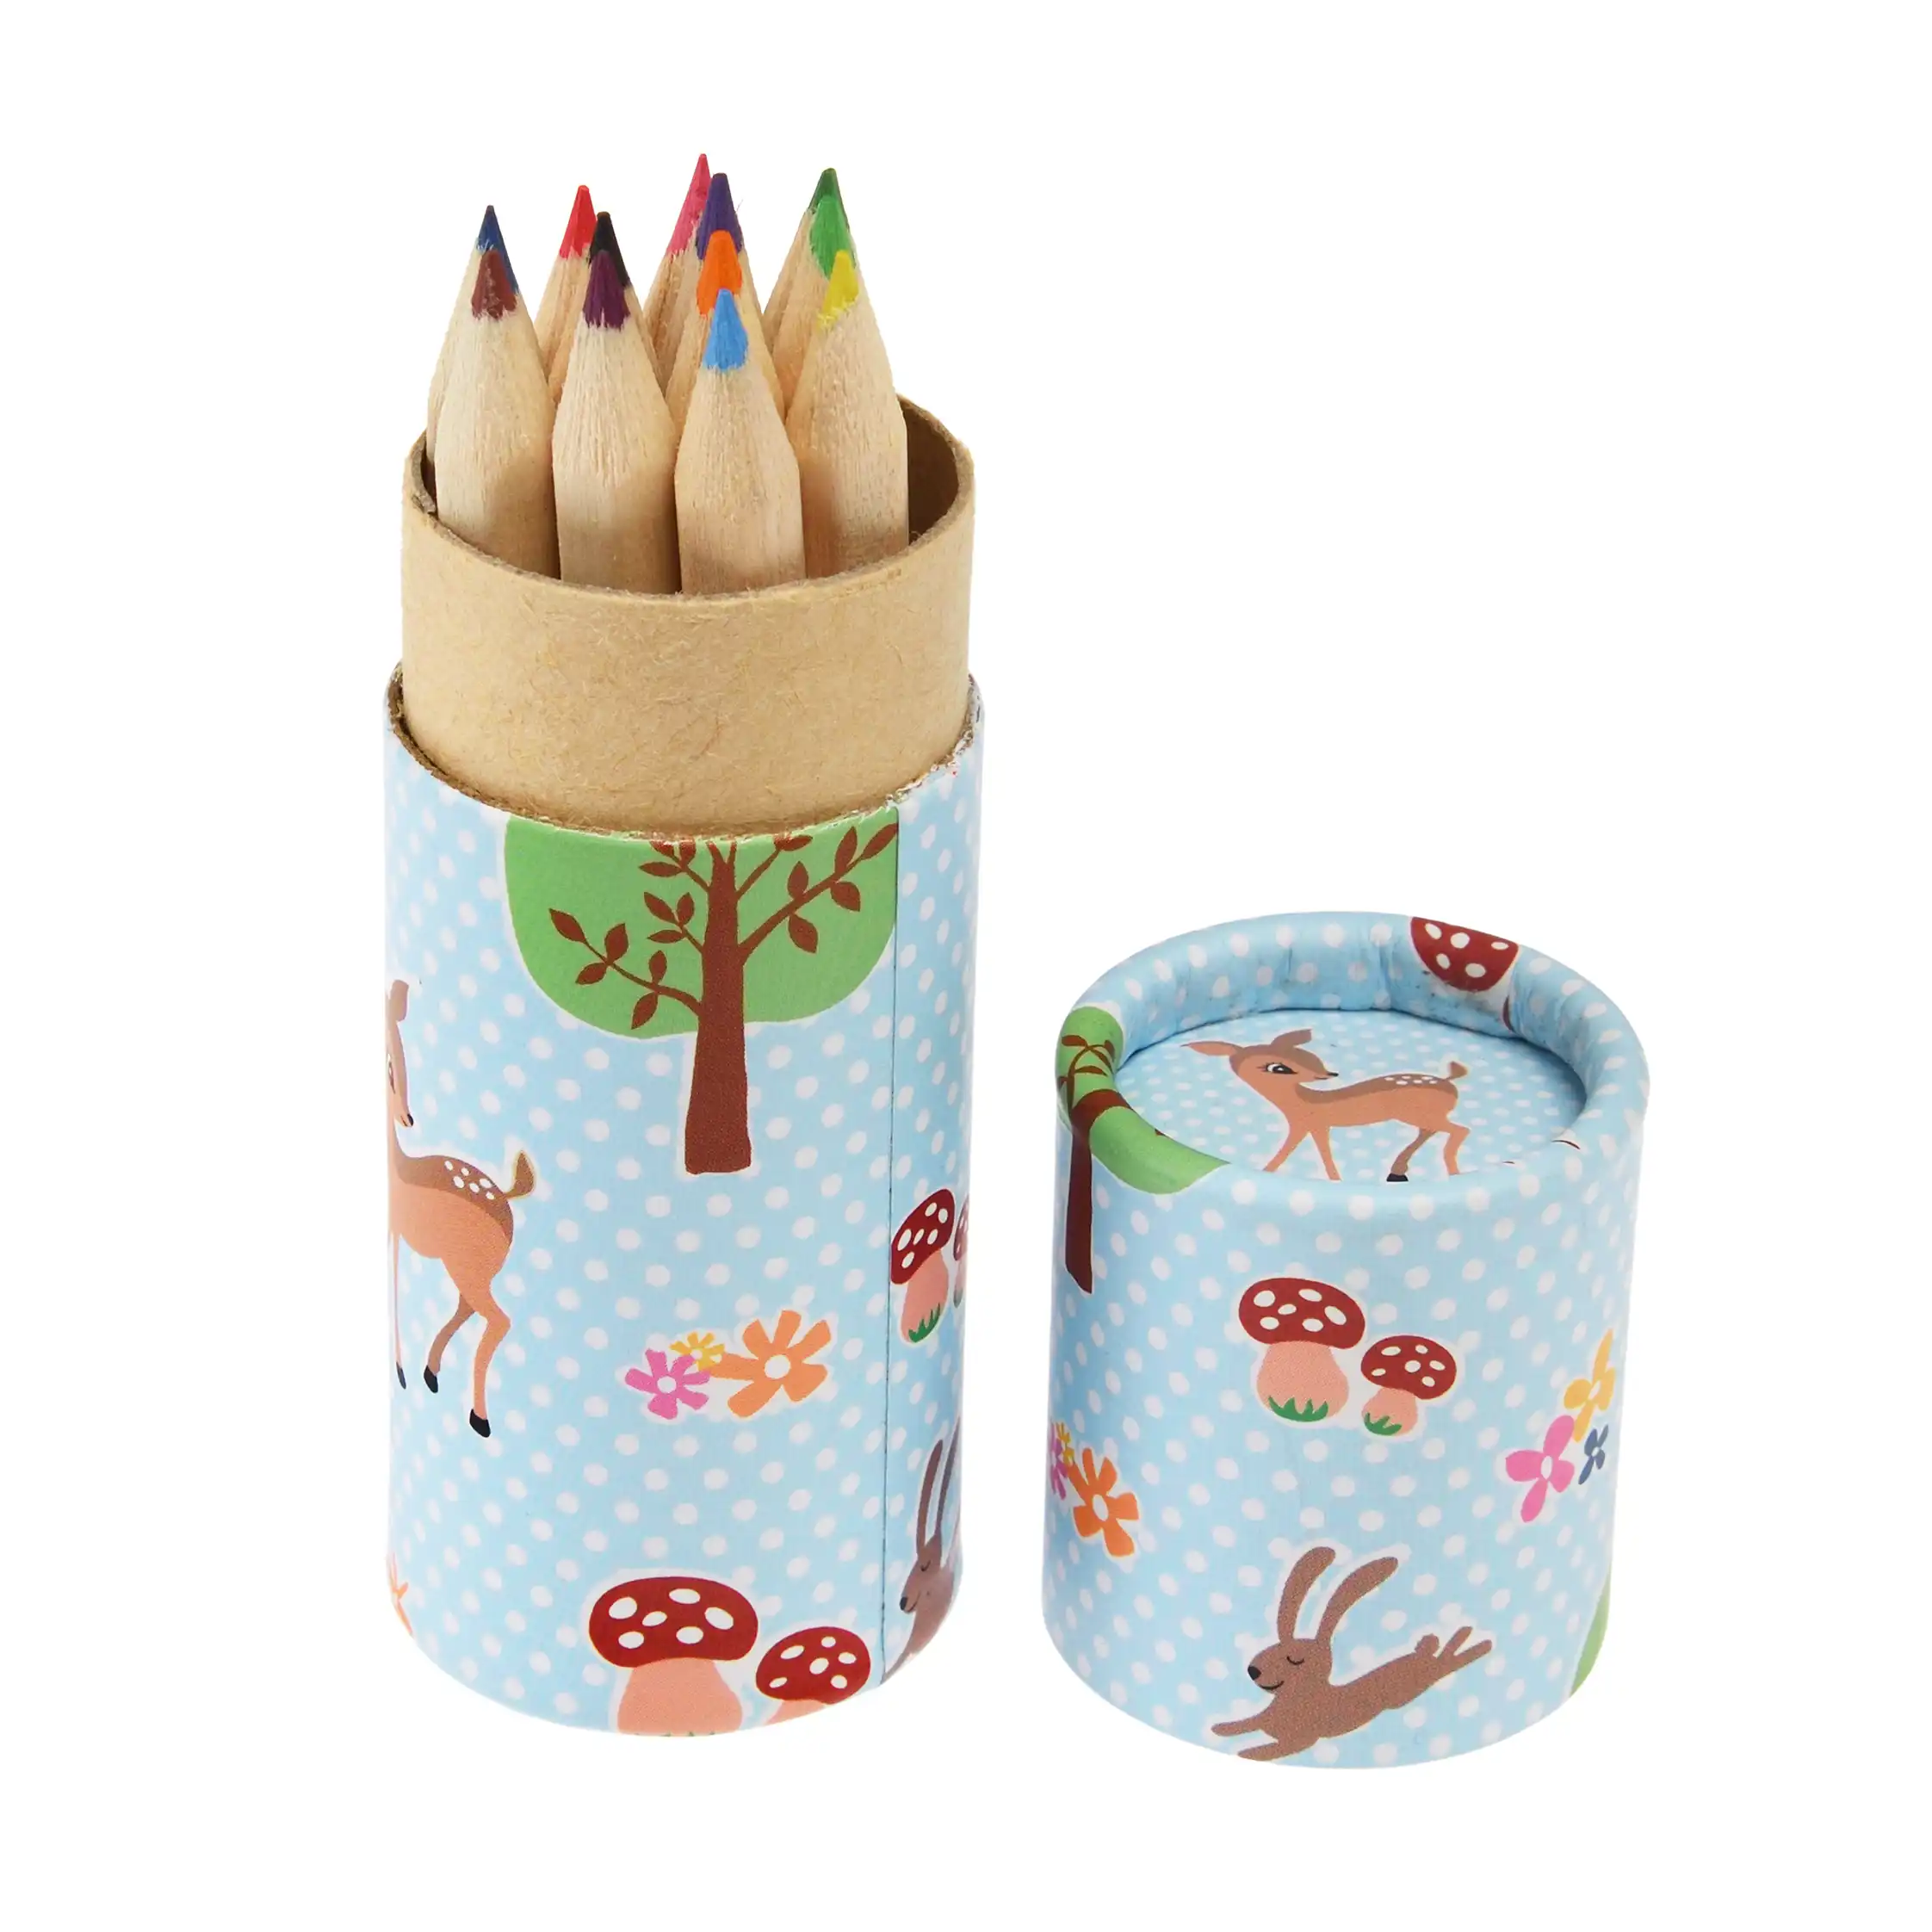 tube of colouring pencils - woodland creatures